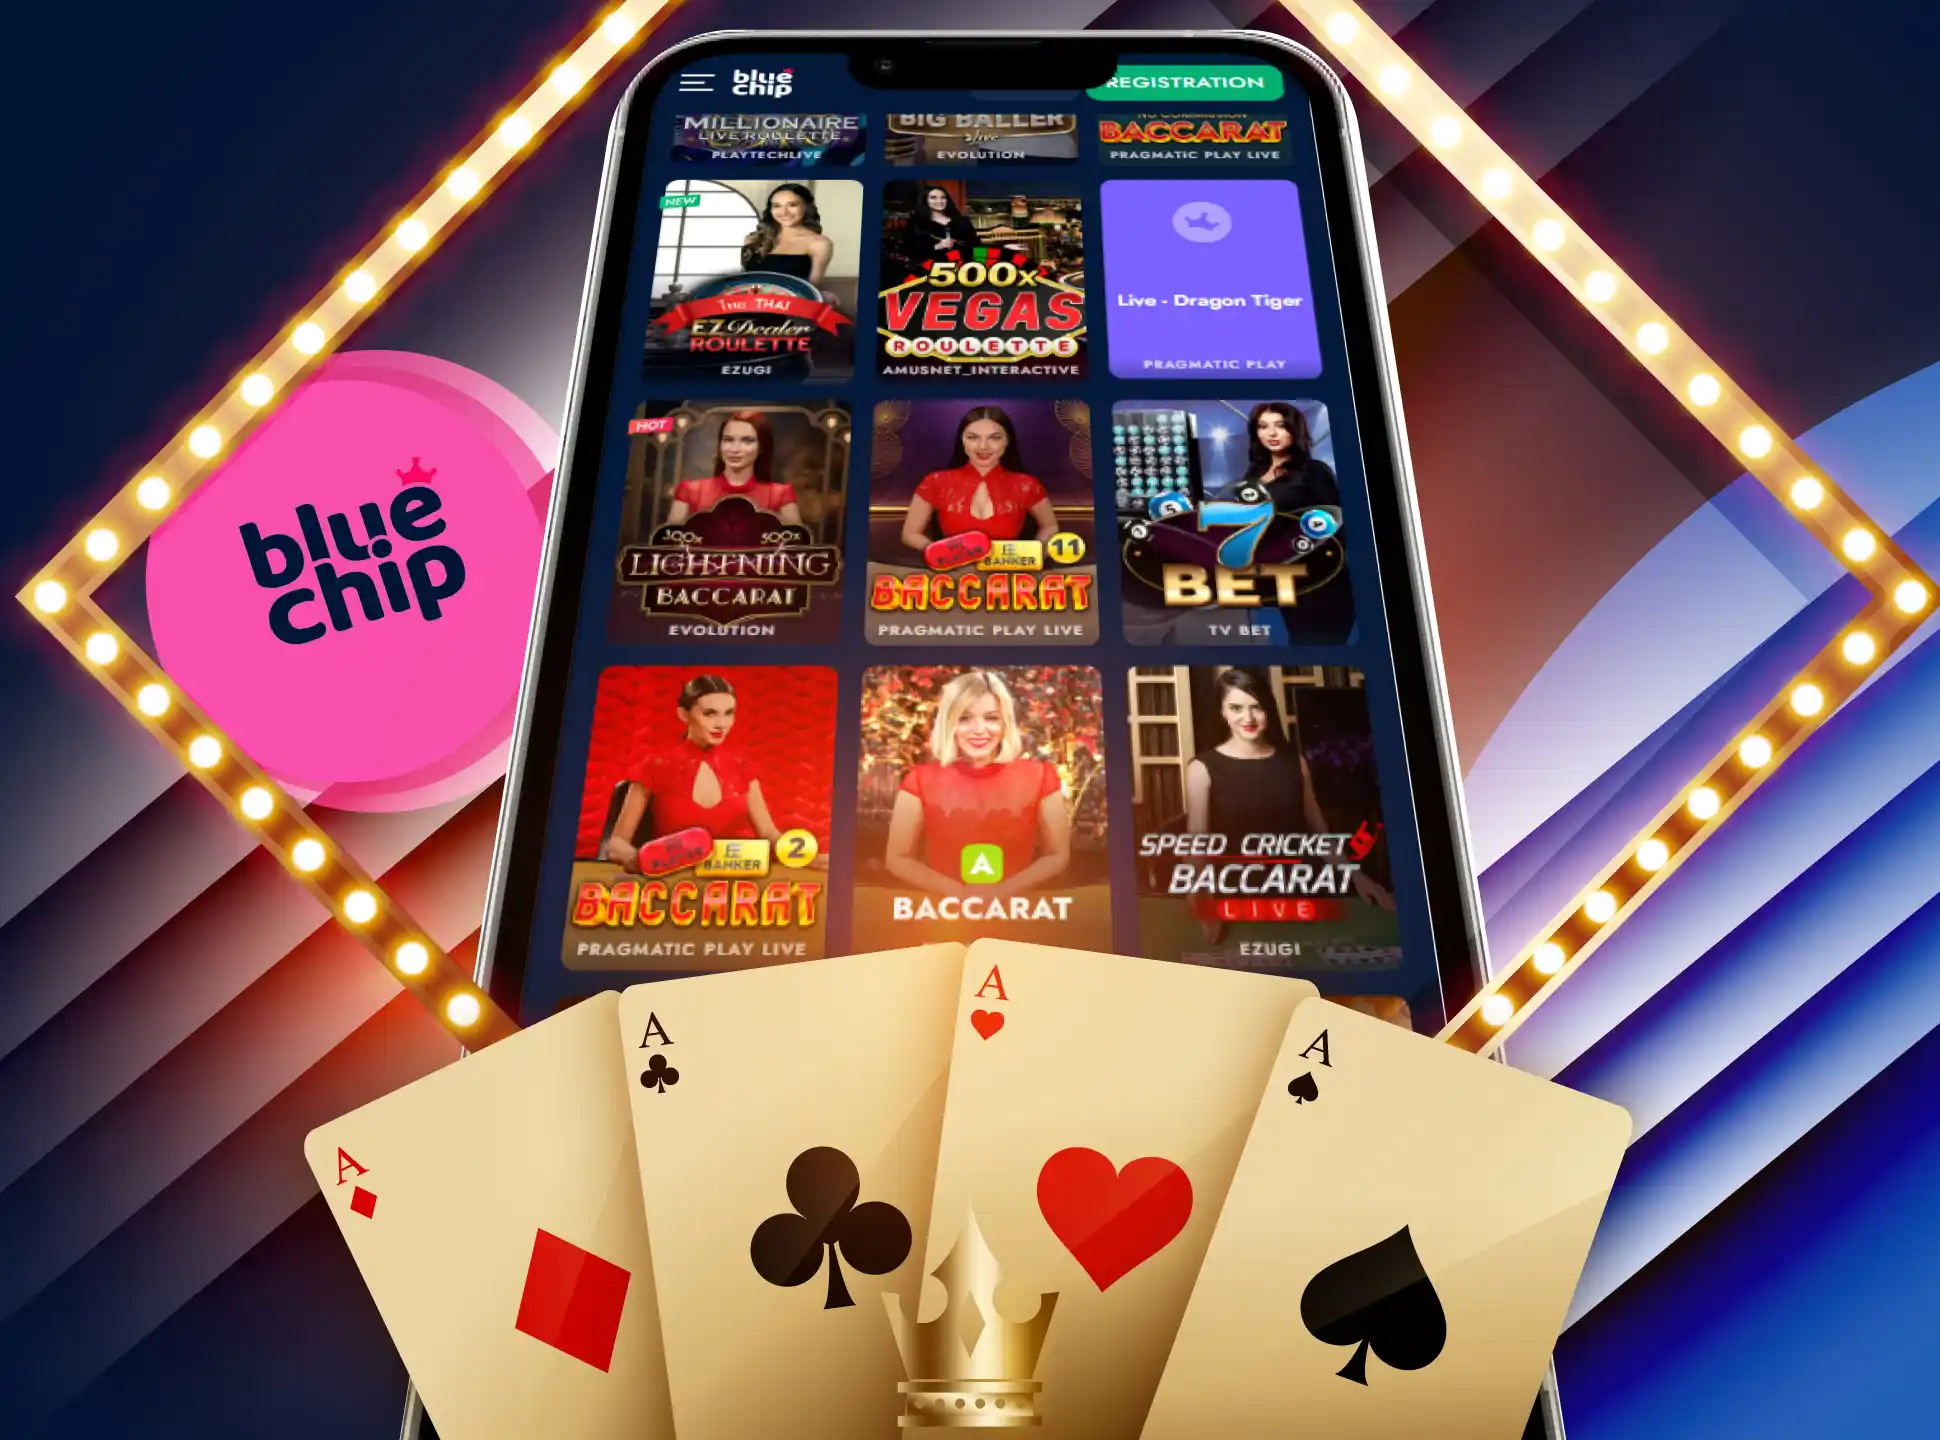 The Bluechip application also gives access to the online casino.